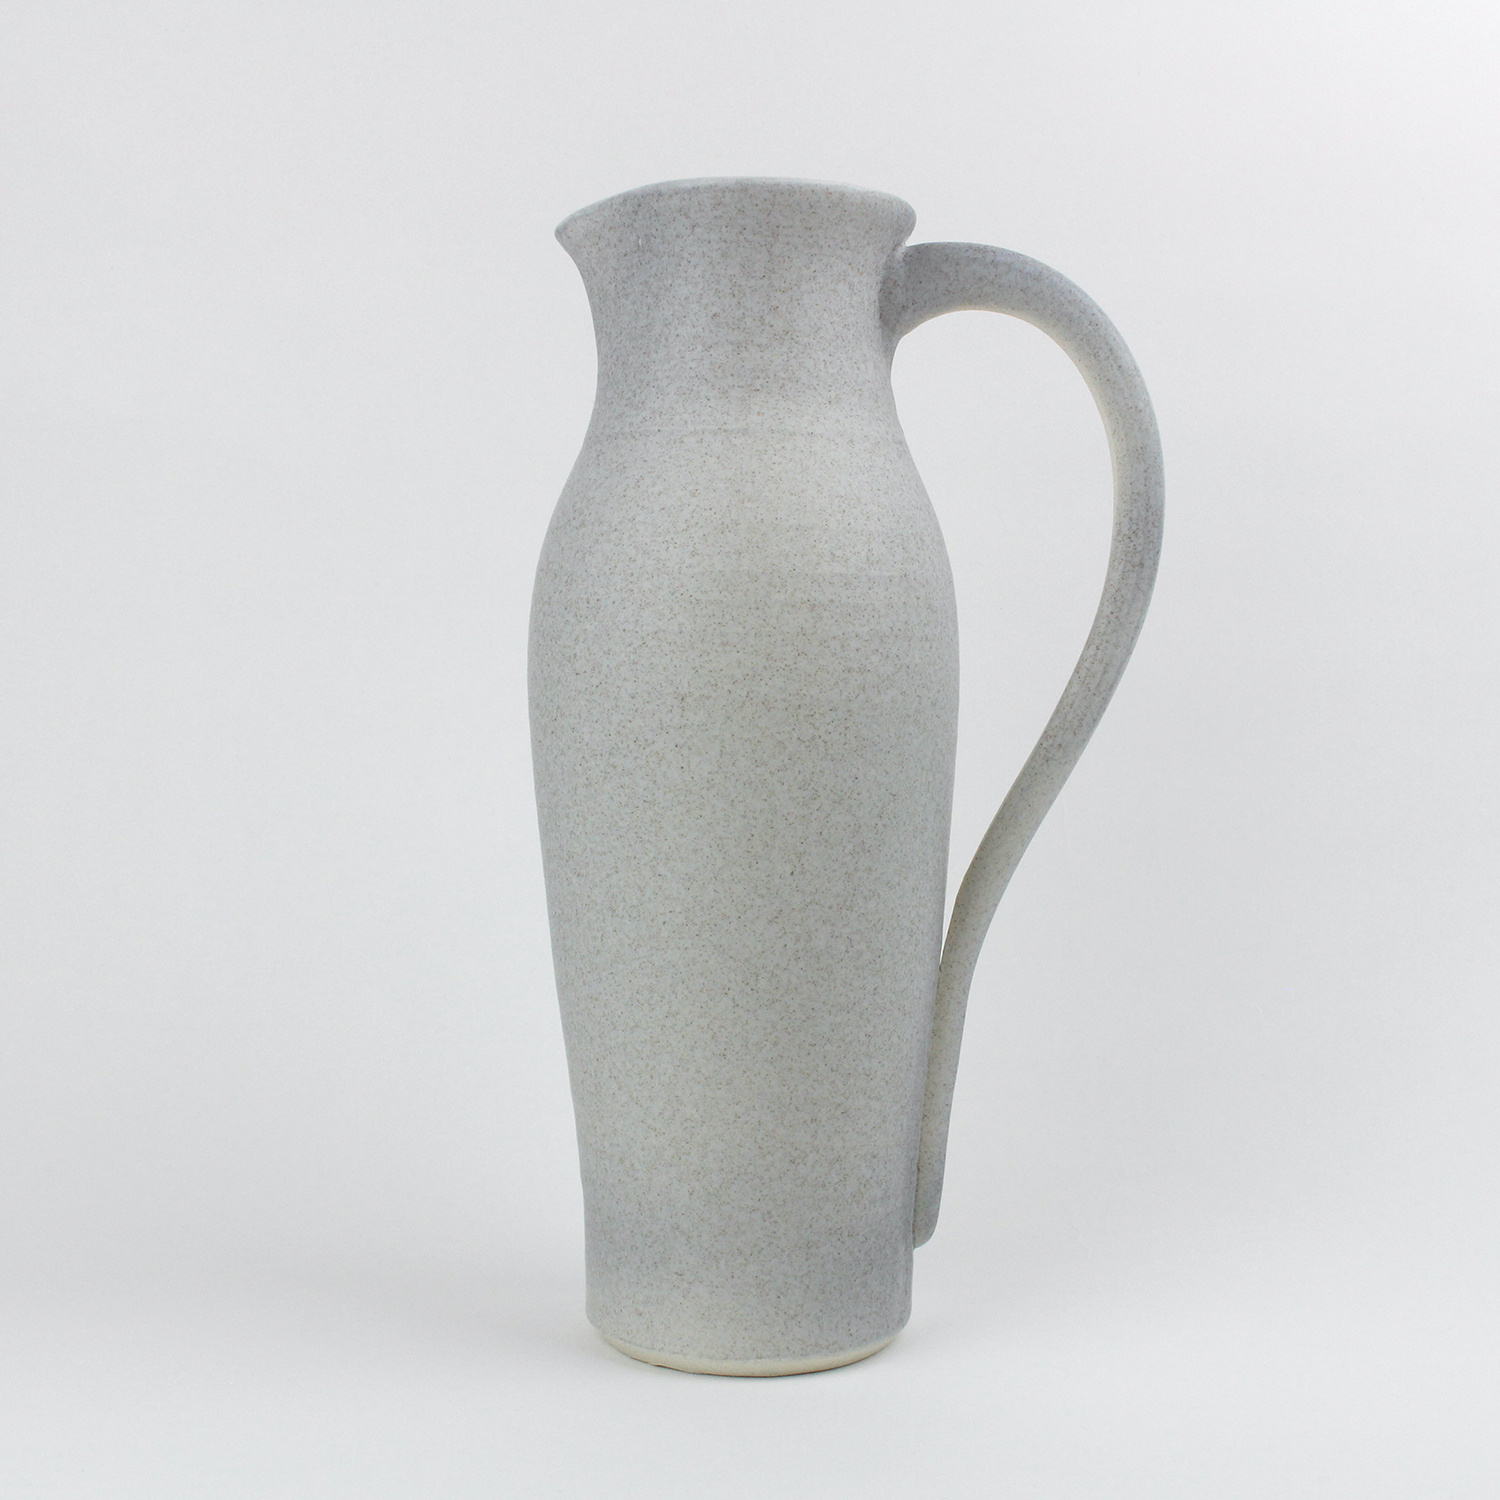 Jug, french grey by Lucy Burley